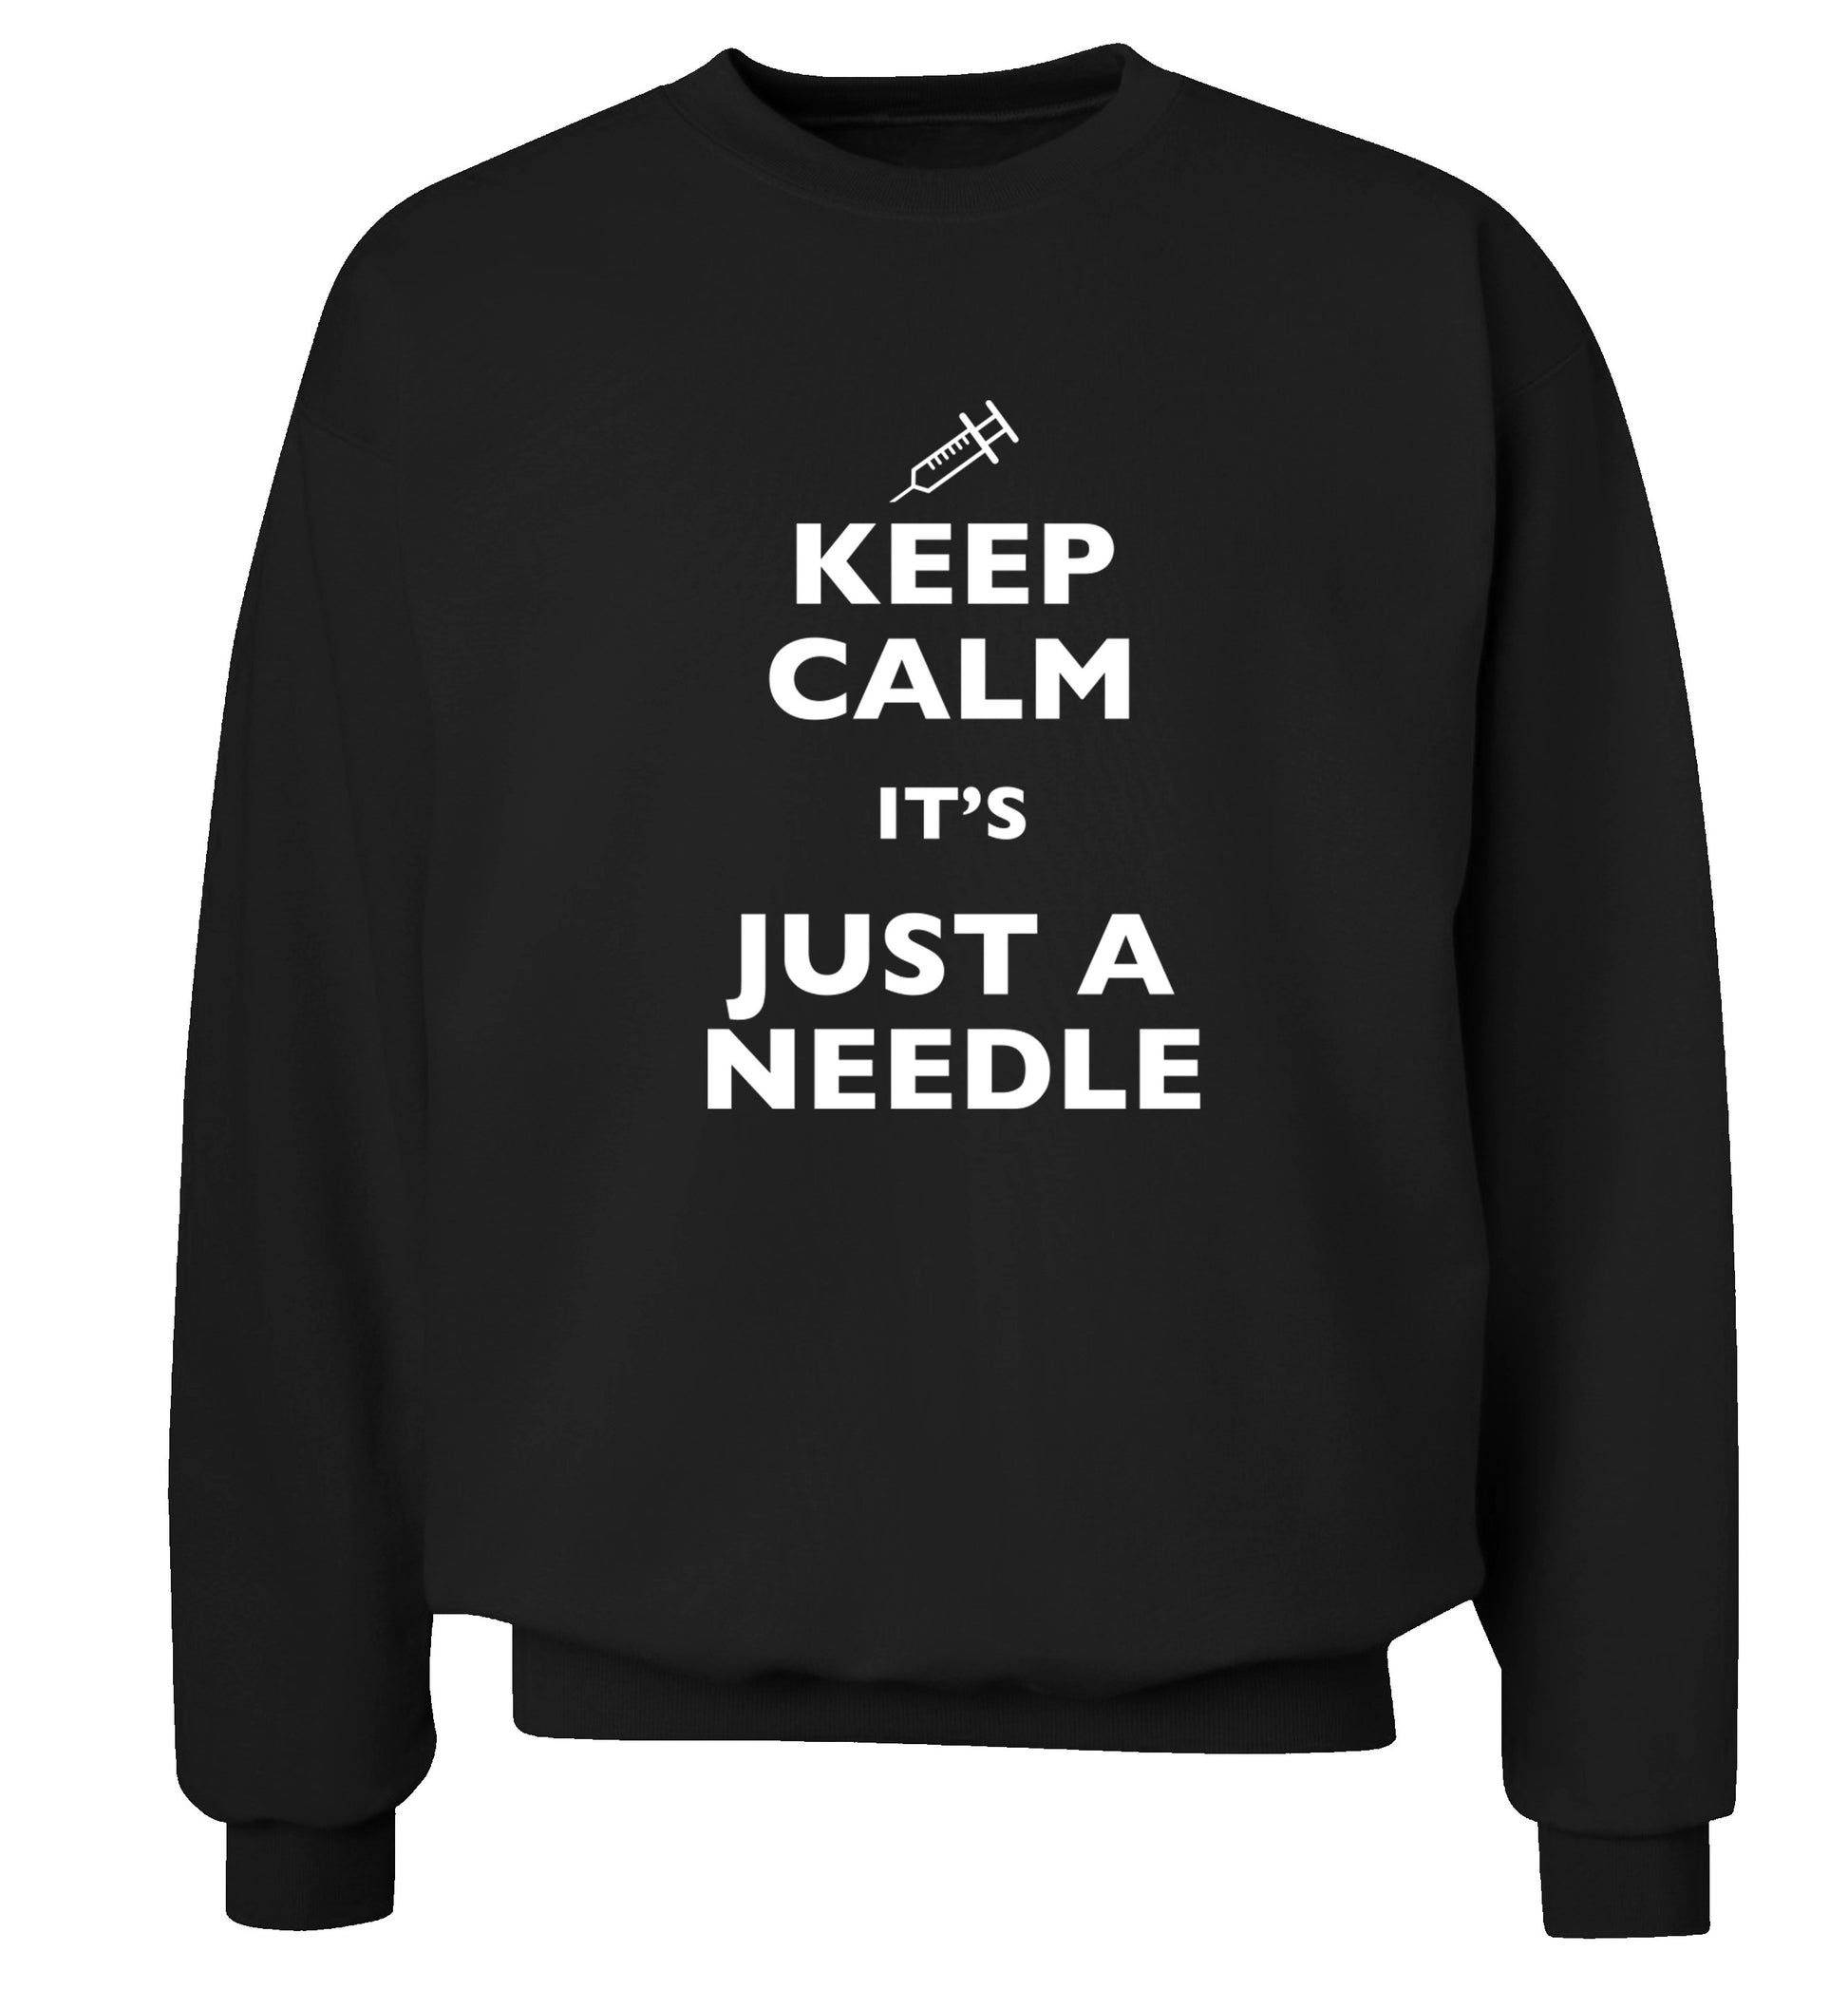 Keep calm it's only a needle Adult's unisex black Sweater 2XL